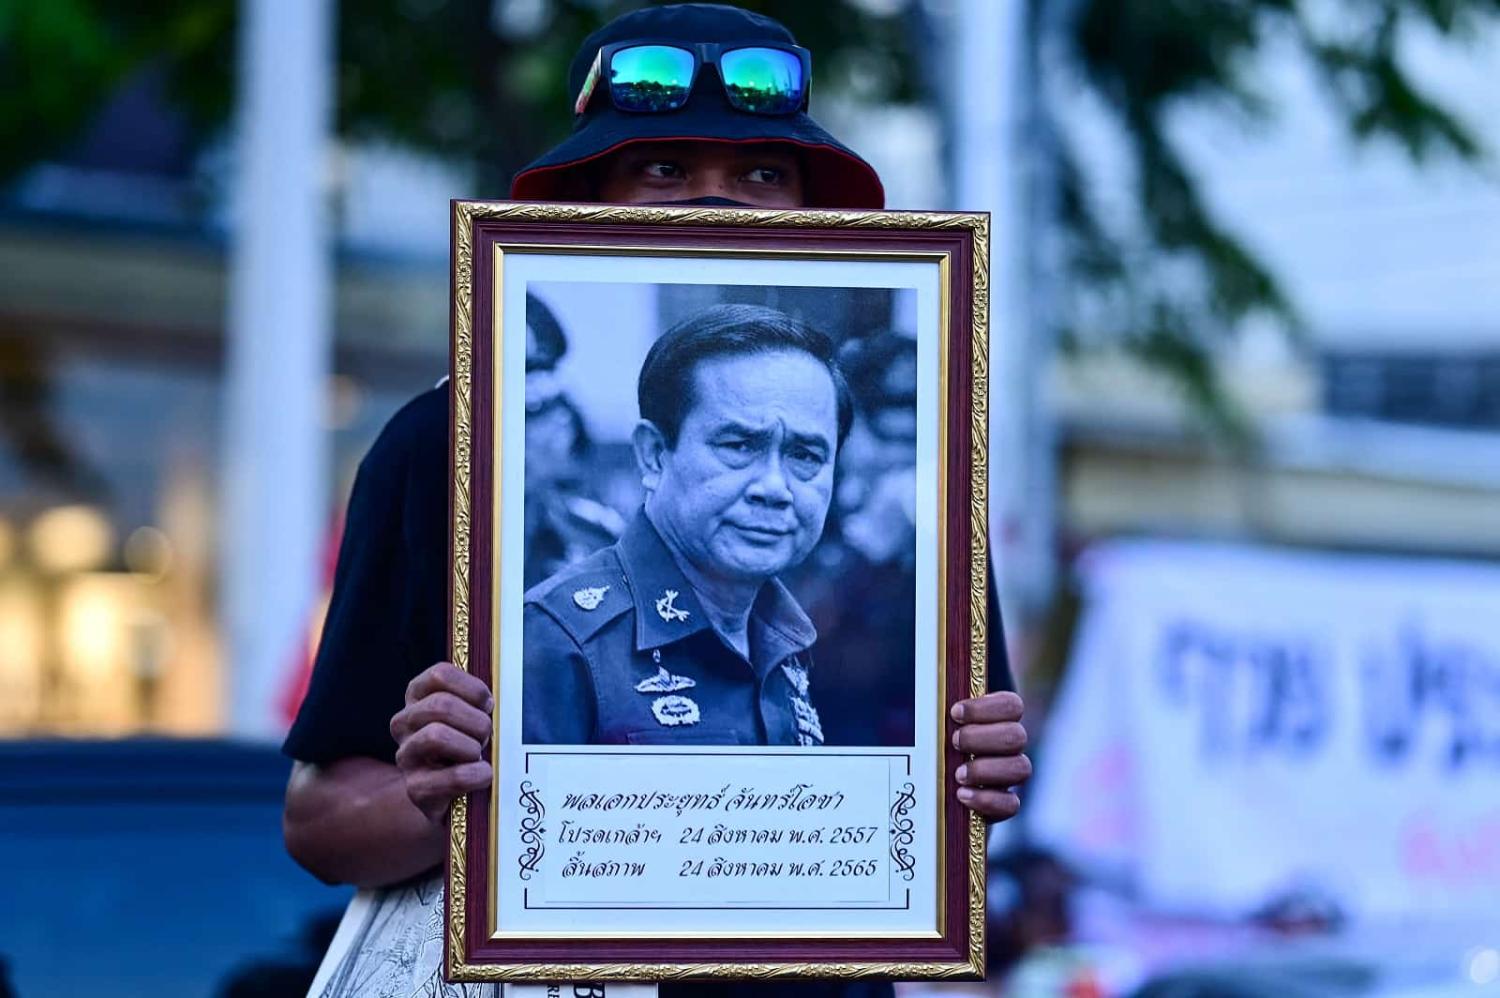 A protester holds a portrait of Thailand’s Prime Minister Prayut Chan-o-Cha during a demonstration calling for his removal, Bangkok, 23 August 2022 (Manan Vatsyayana/AFP via Getty Images)